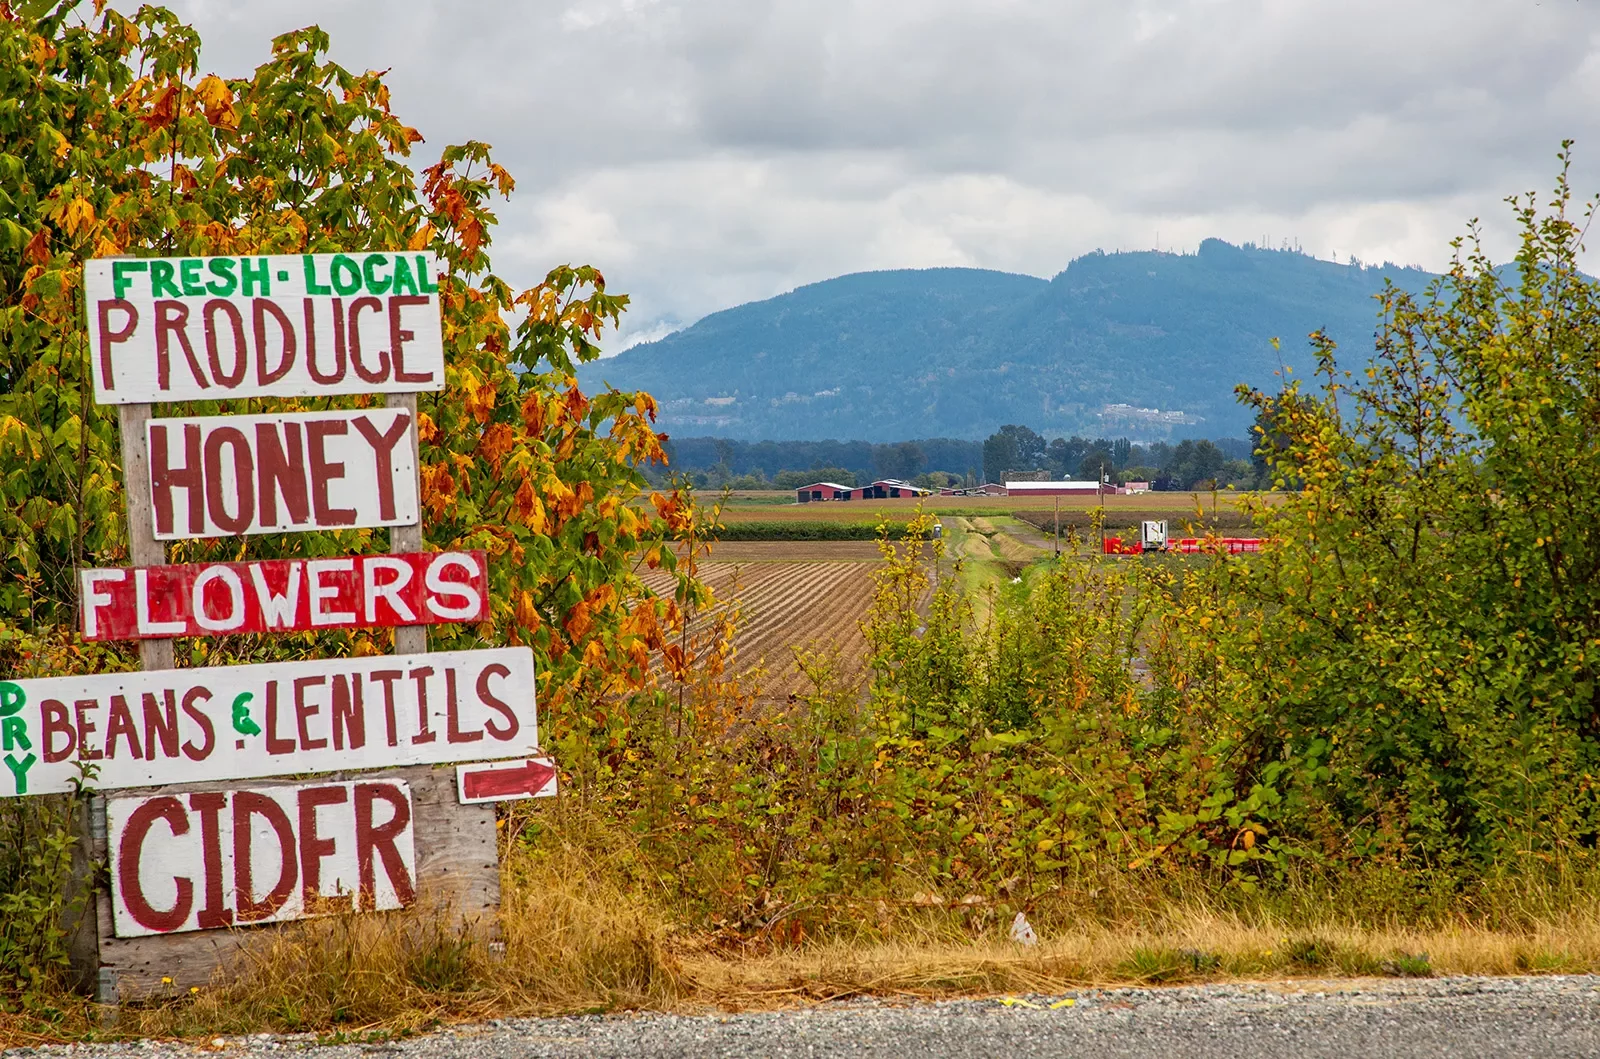 &quot;LOCAL PRODUCE&quot; sign, crops and farm in background.